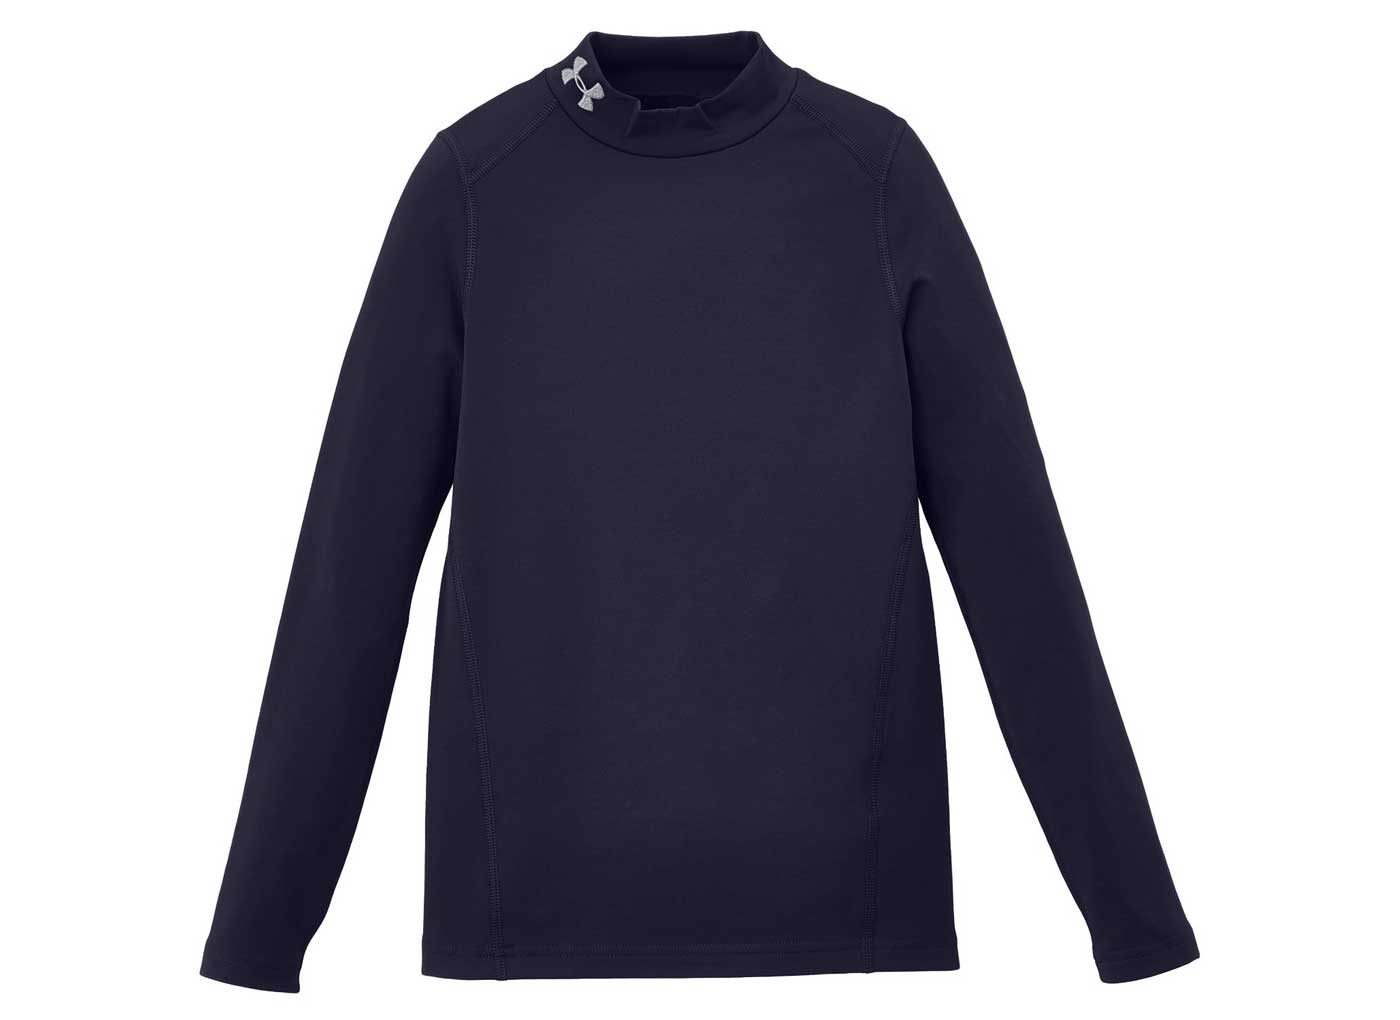 Under Armour ColdGear Fitted Mock Neck Long Sleeve Shirt - Men's